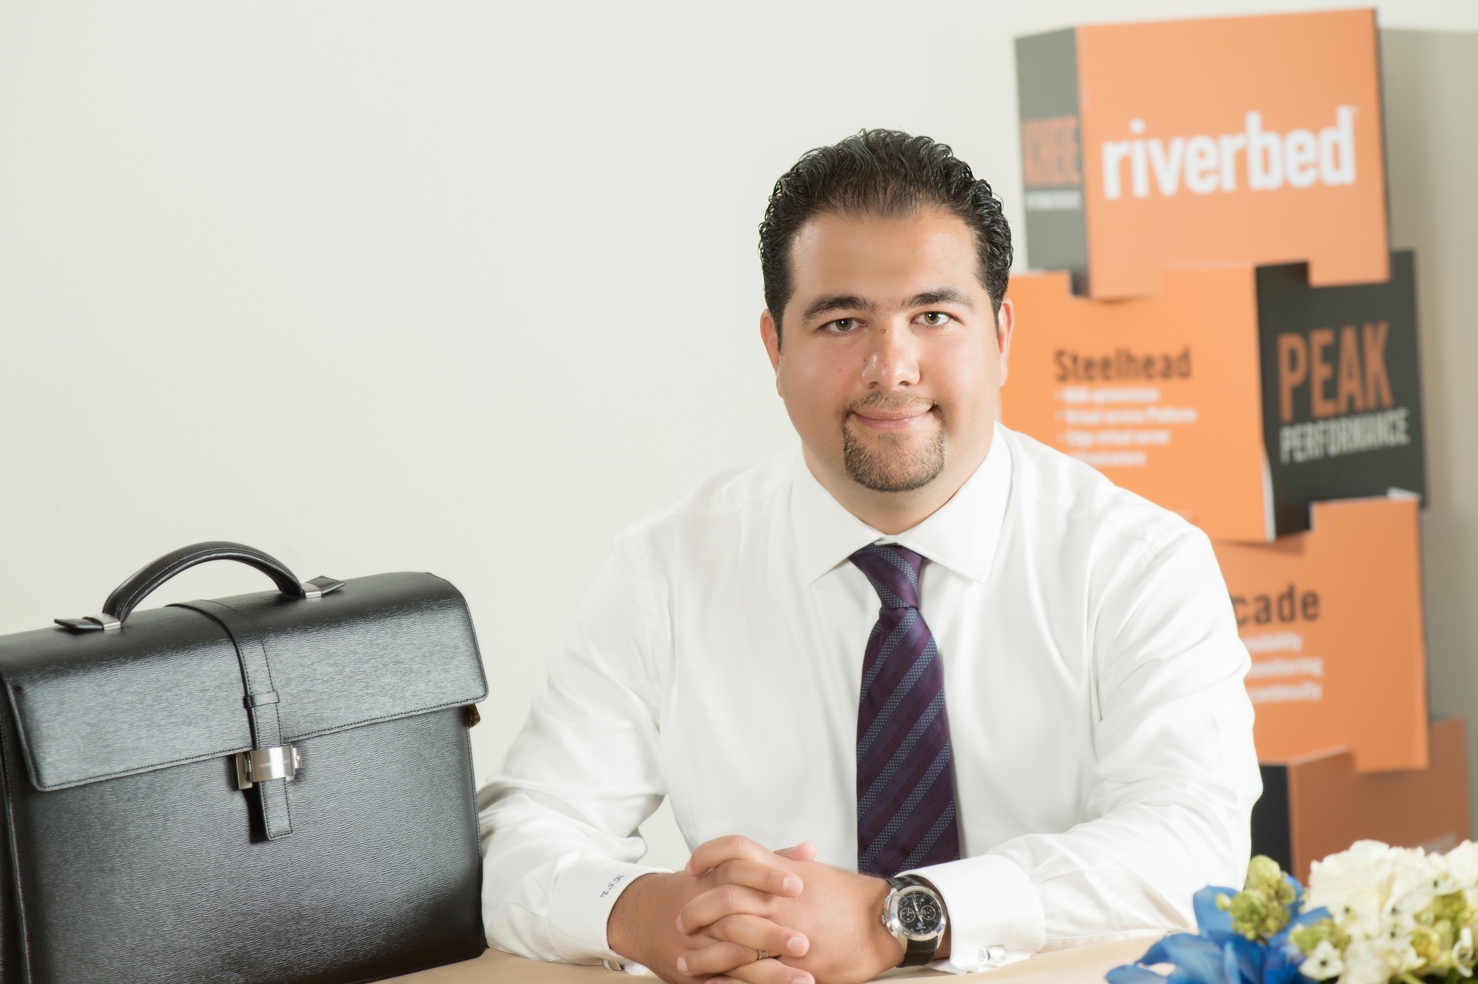 Riverbed rolls out SteelFusion 4.2 with Support for VMware vSphere 6